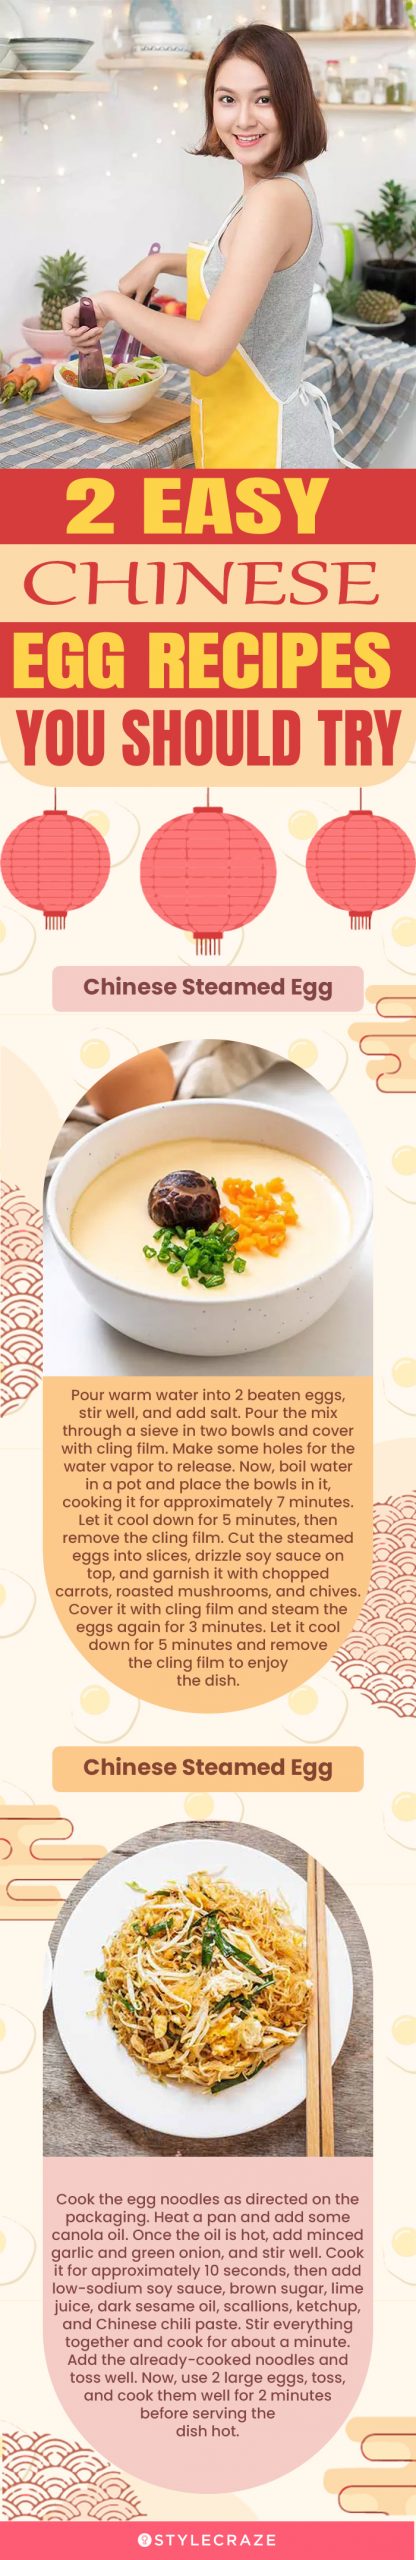 2 easy chinese egg recipes you should try (infographic)